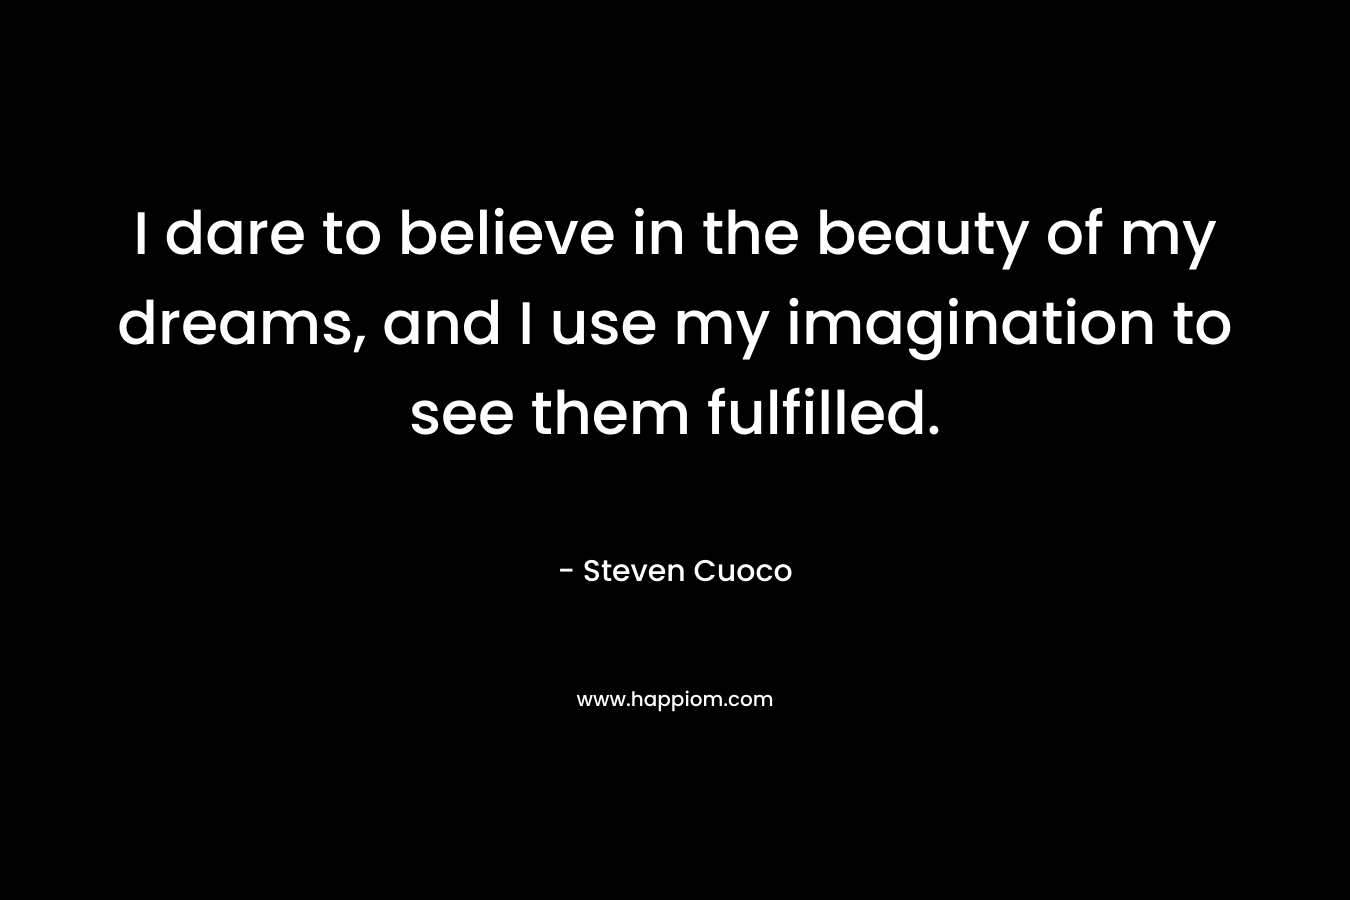 I dare to believe in the beauty of my dreams, and I use my imagination to see them fulfilled.